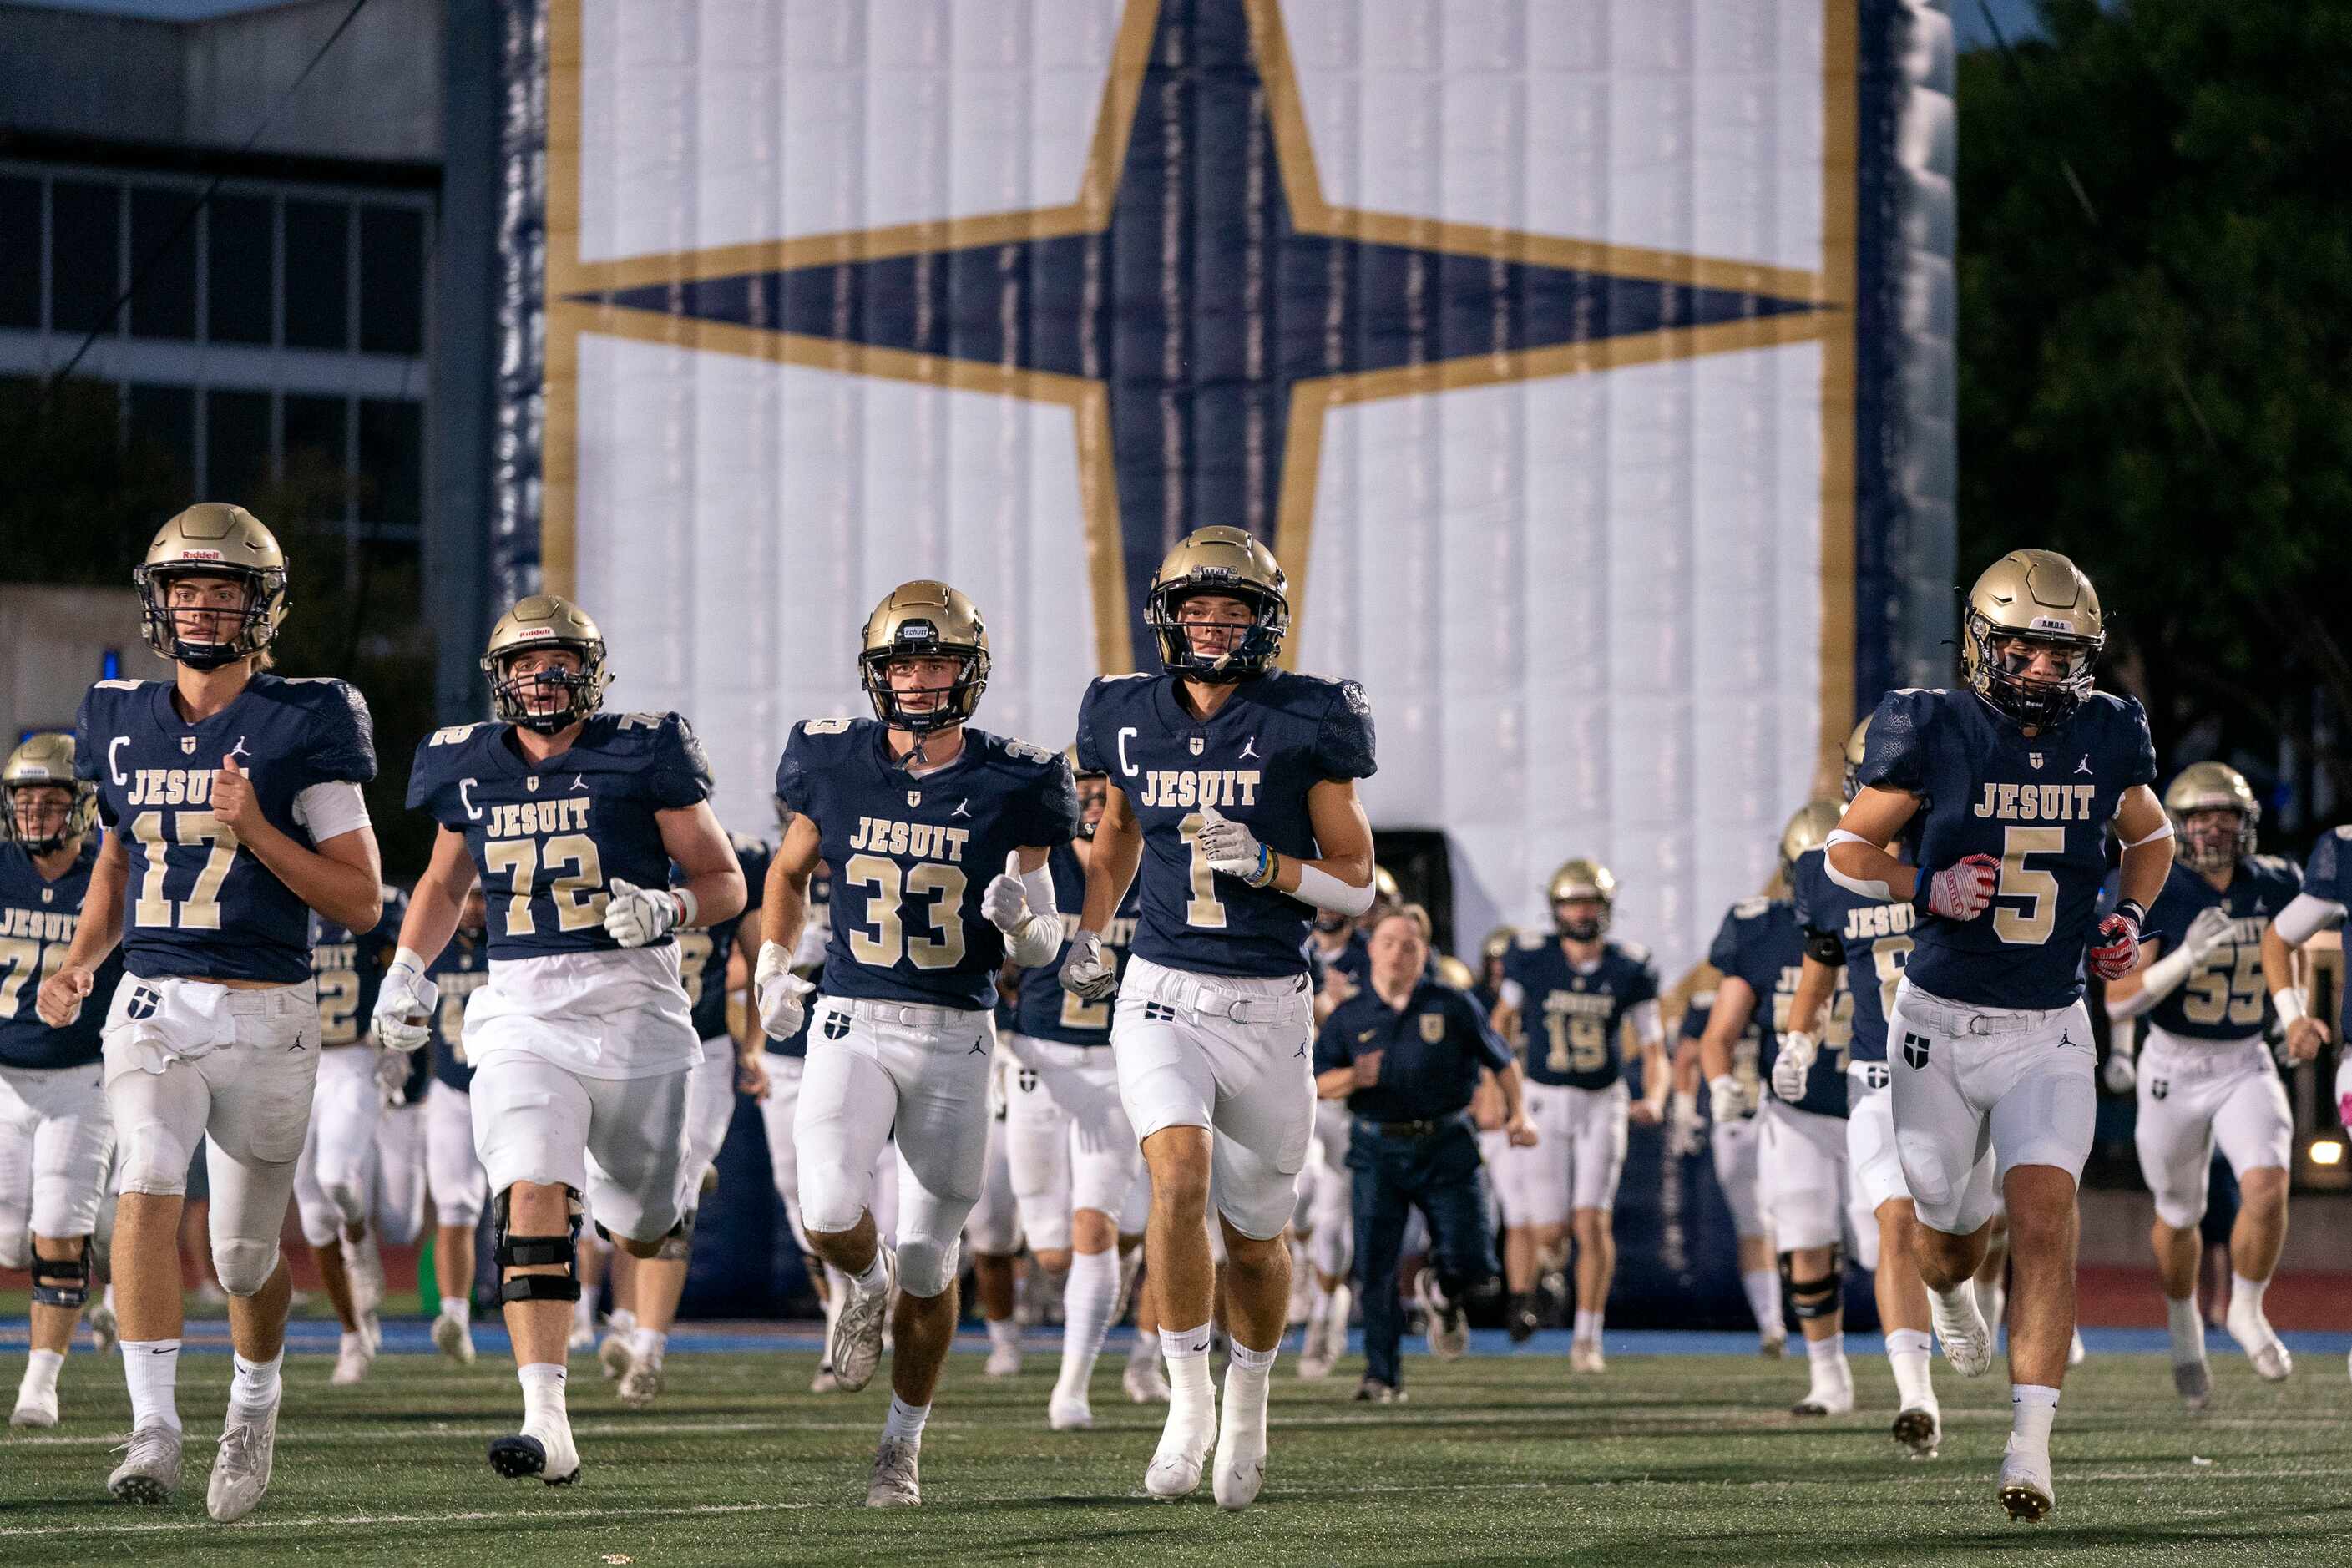 The Jesuit Rangers take the field before a high school football game against Richardson...